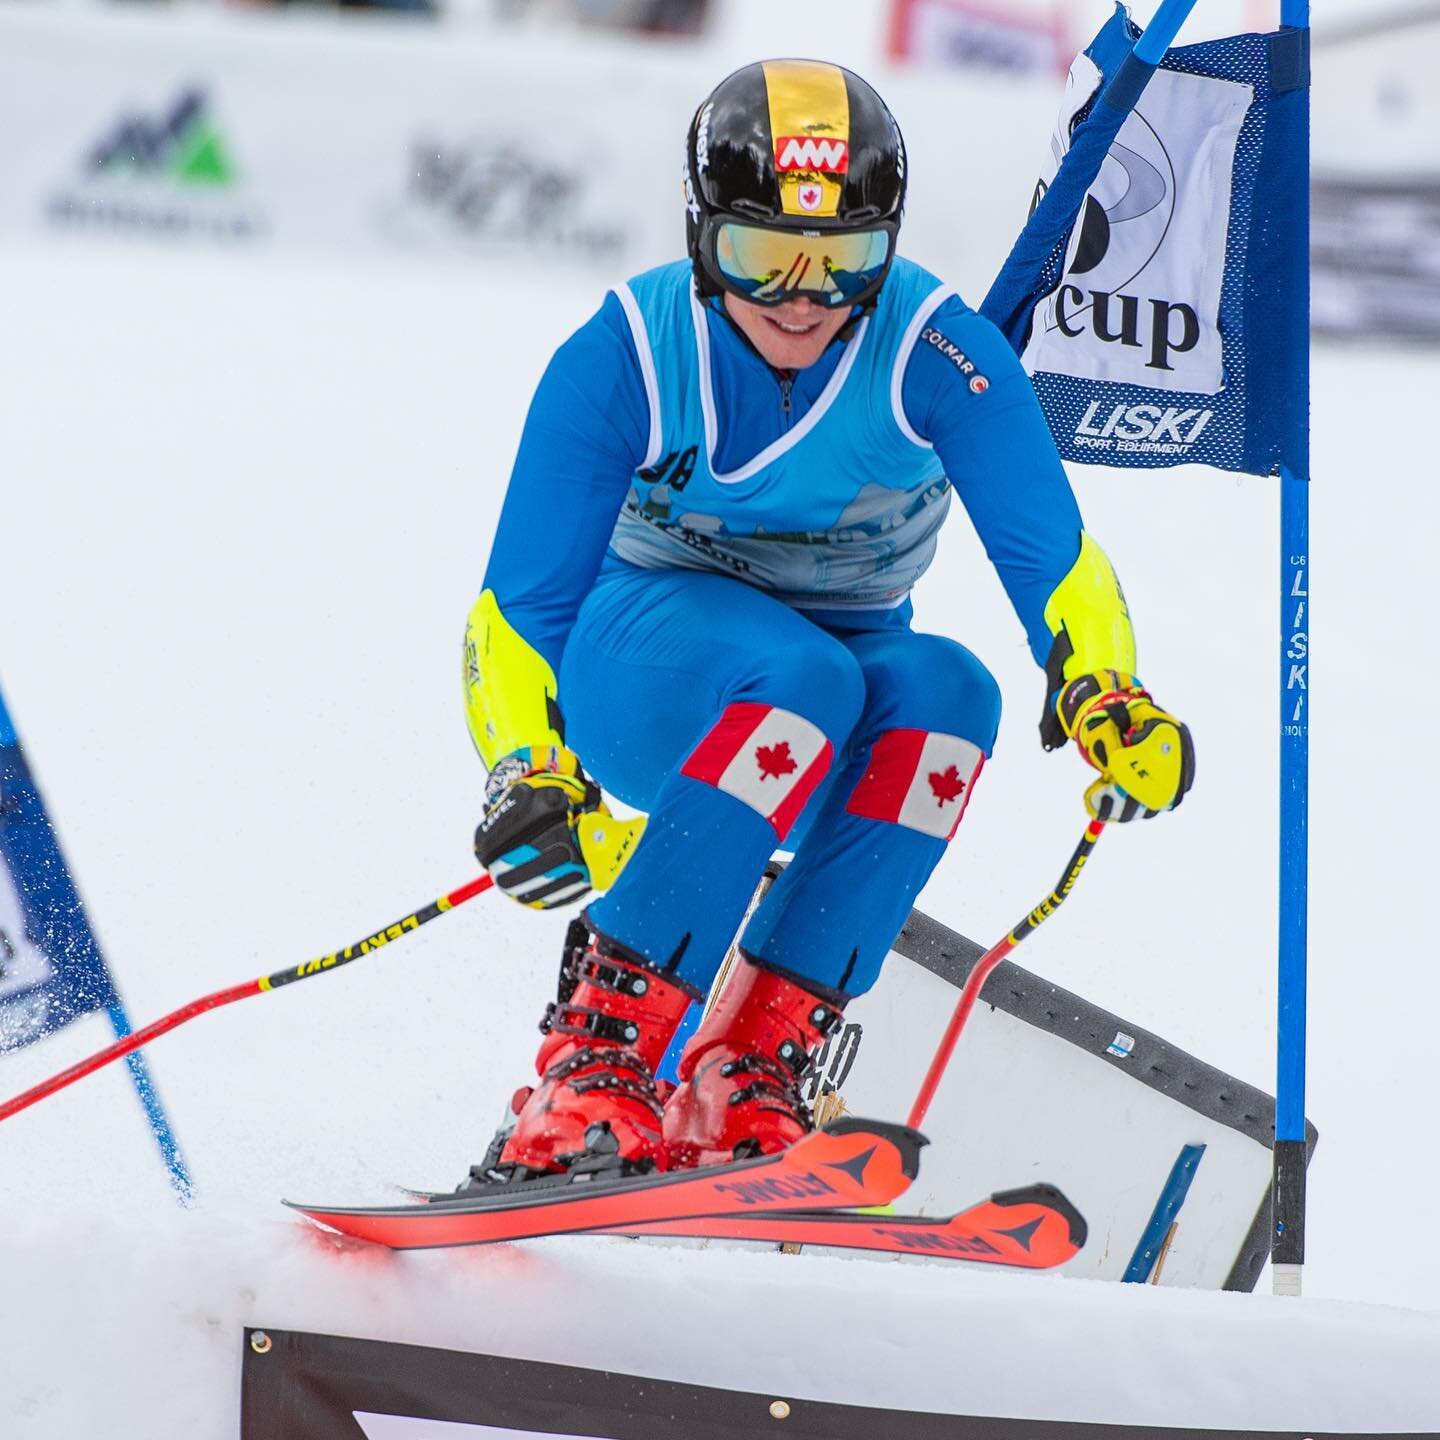 Photos are up for viewing! Go to bozocup.com and scroll down to the photo links.

Big thanks to @johnechrome for the fantastic captures!

#bozocup2023 #ski #race #headtohead